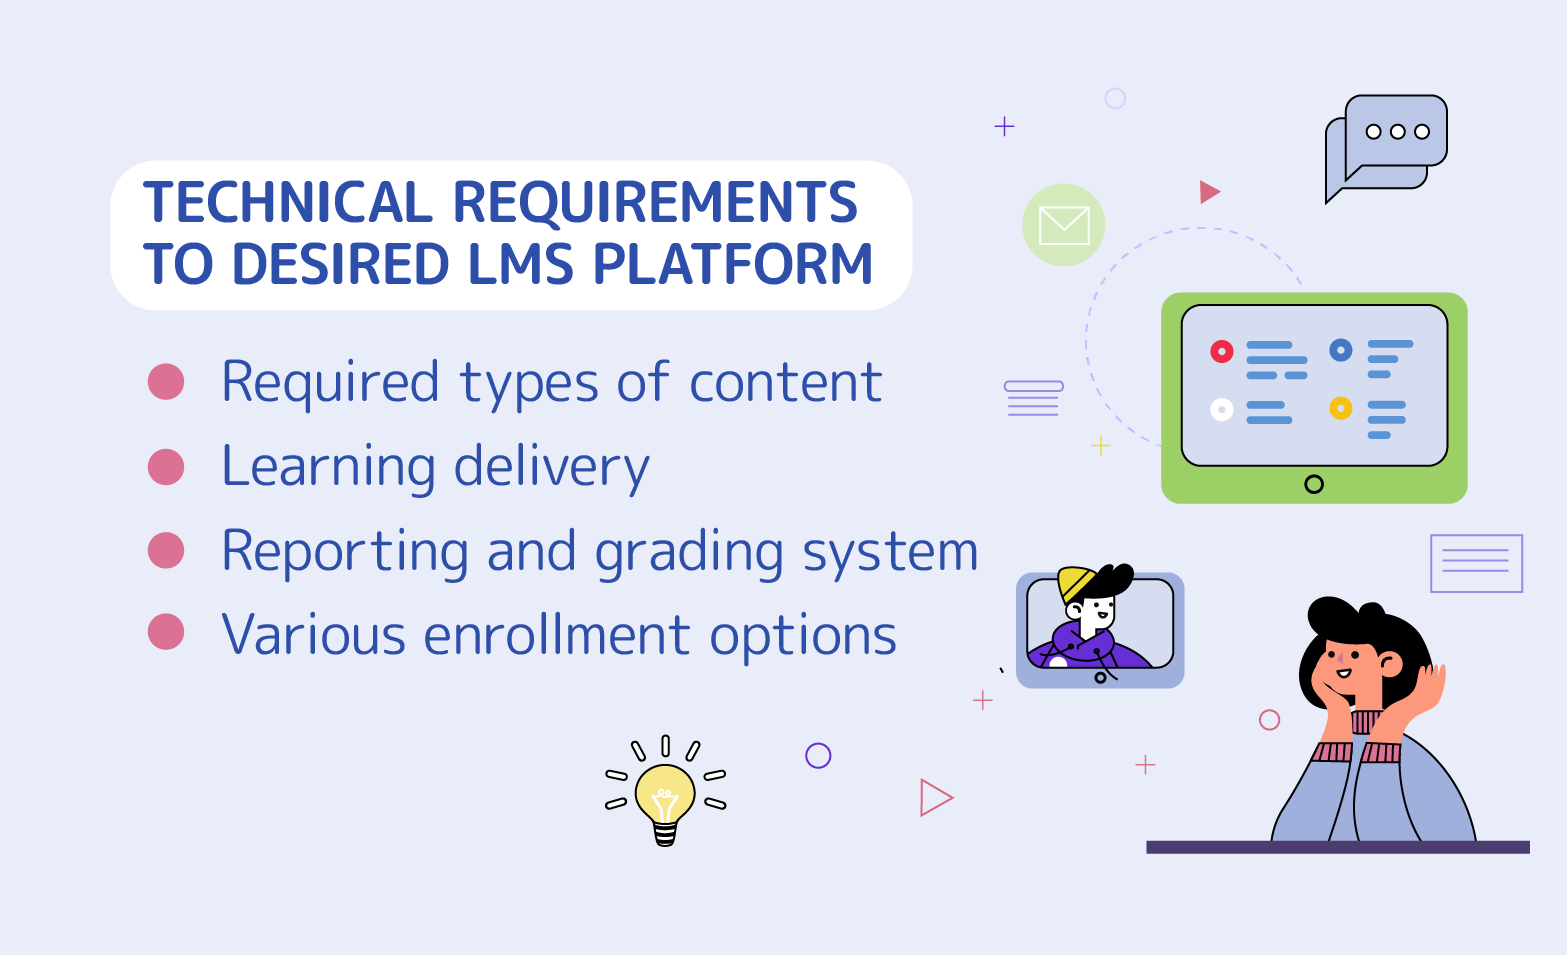 Requirements to Desired LMS Platform